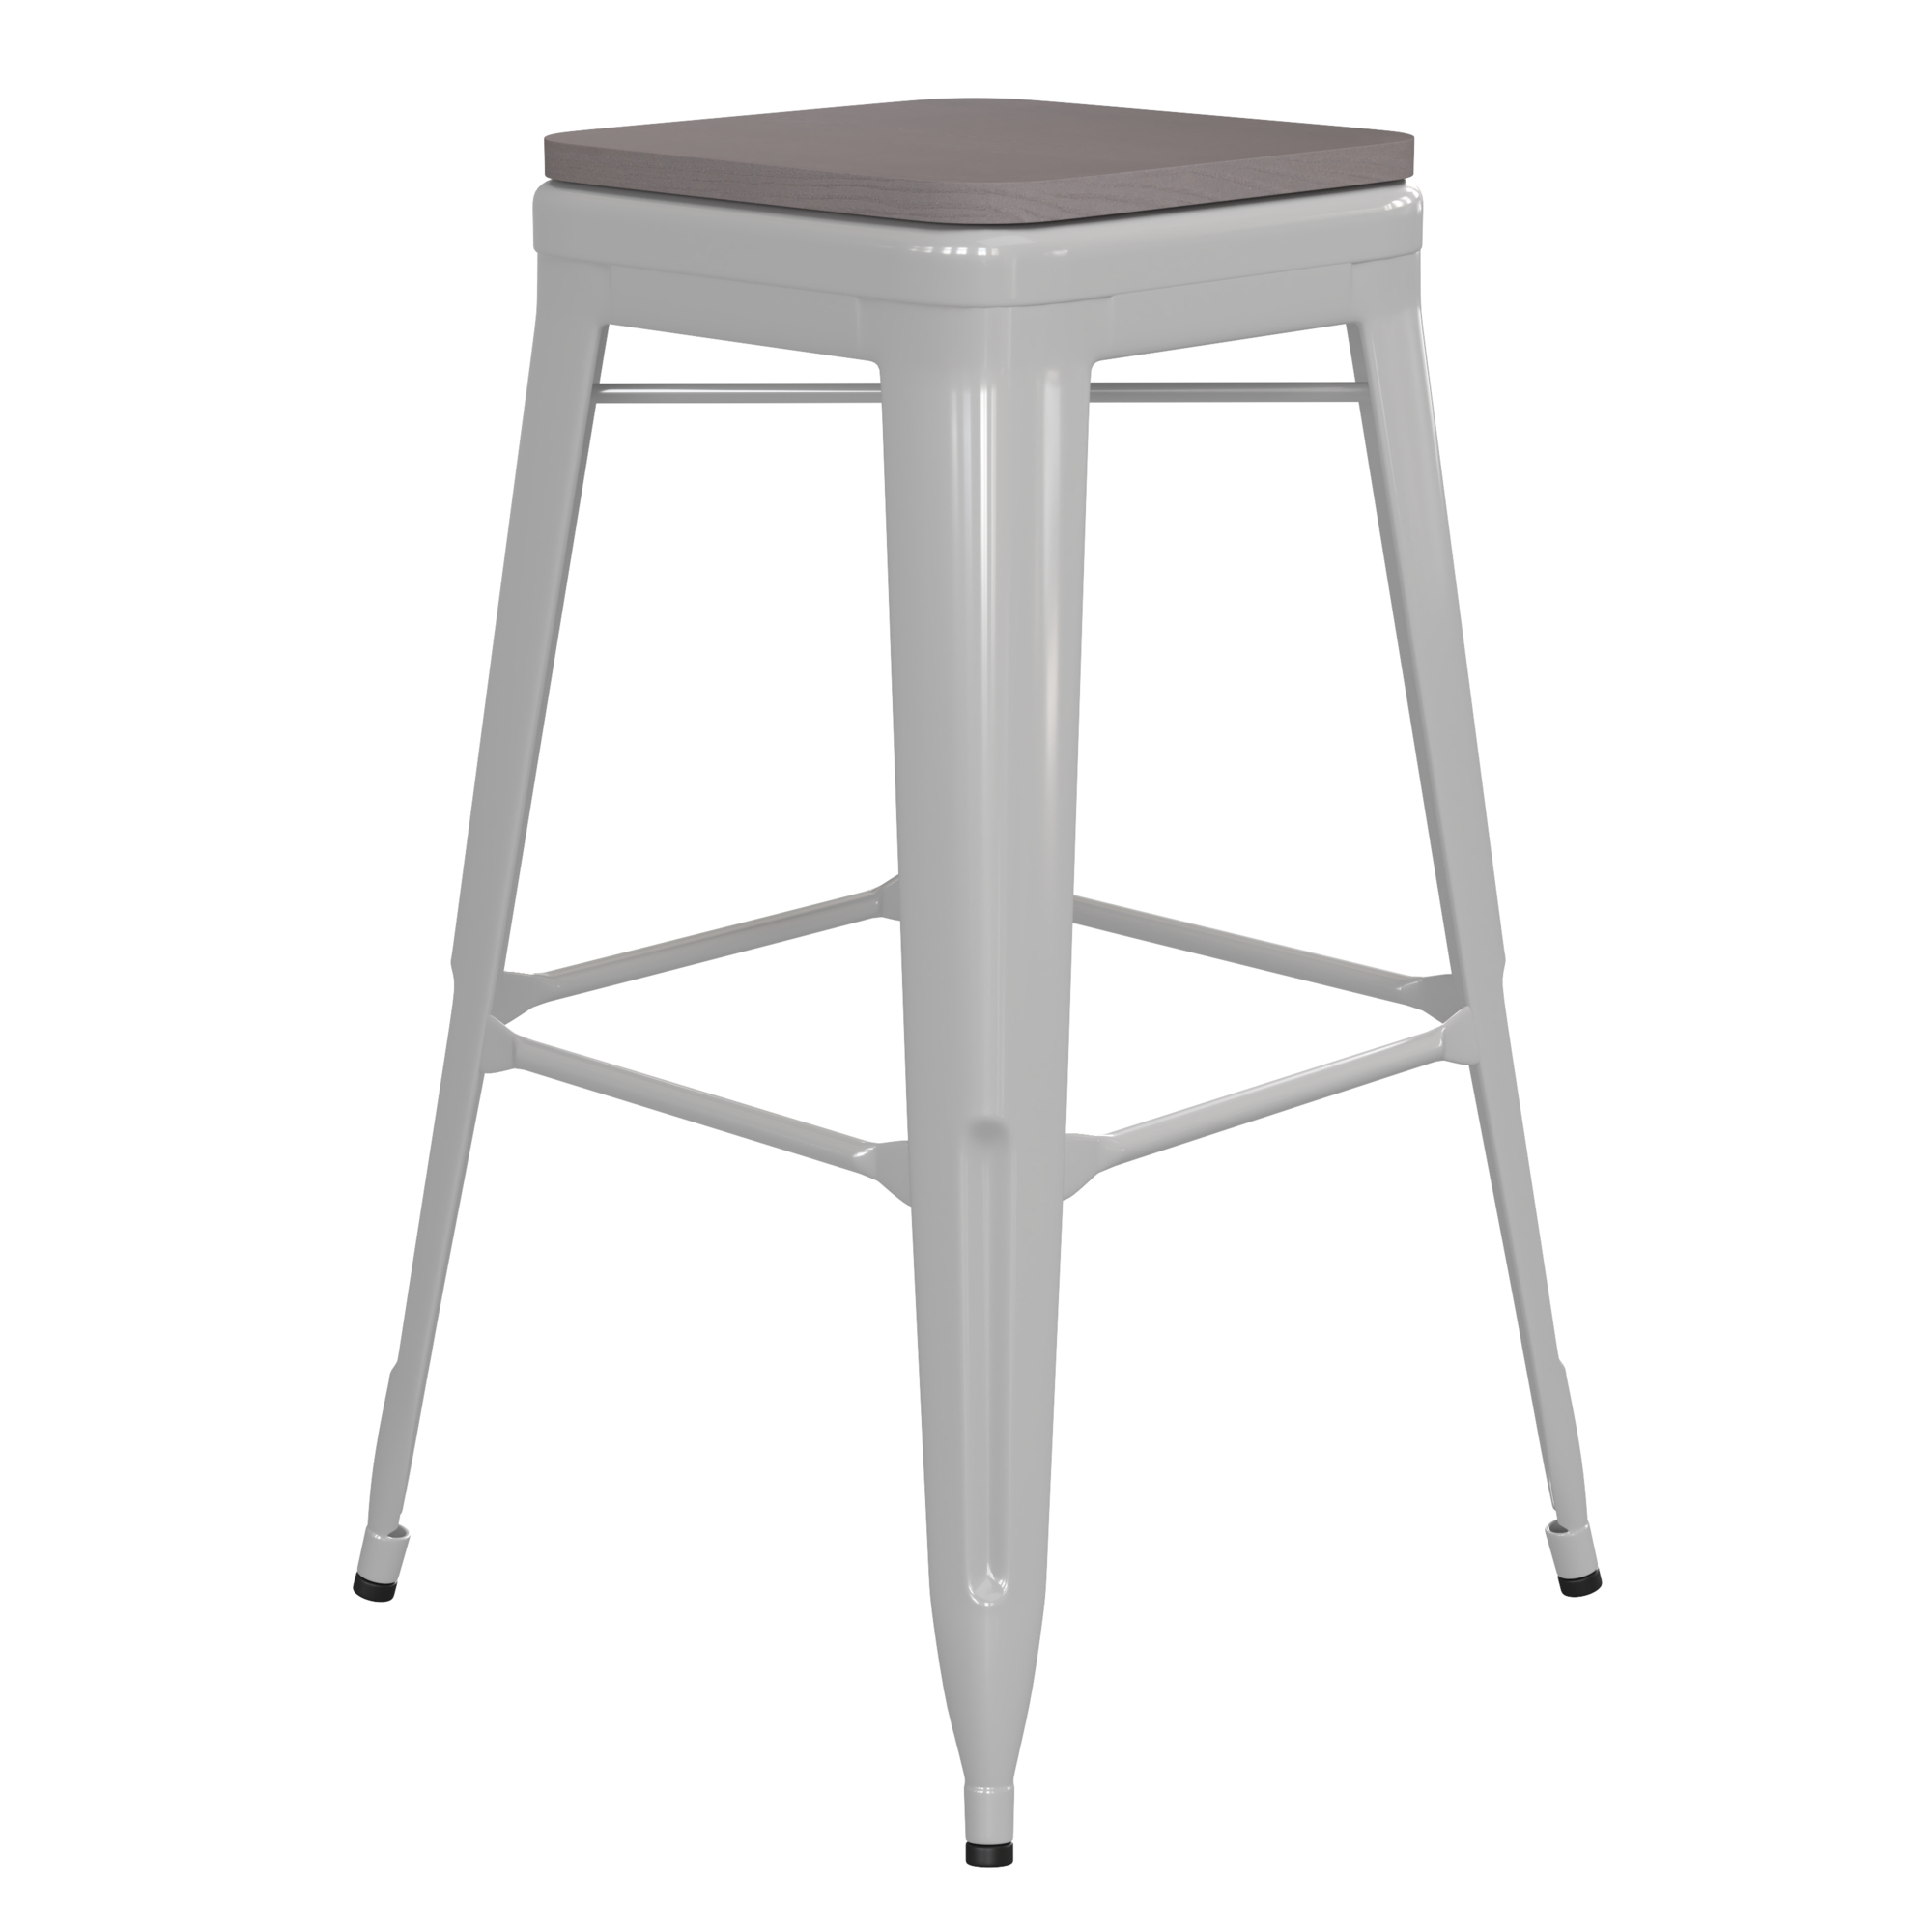 Flash Furniture, 30Inch White Metal Stool-Gray Poly Seat, Primary Color White, Included (qty.) 1, Model CH3132030WHPL2G